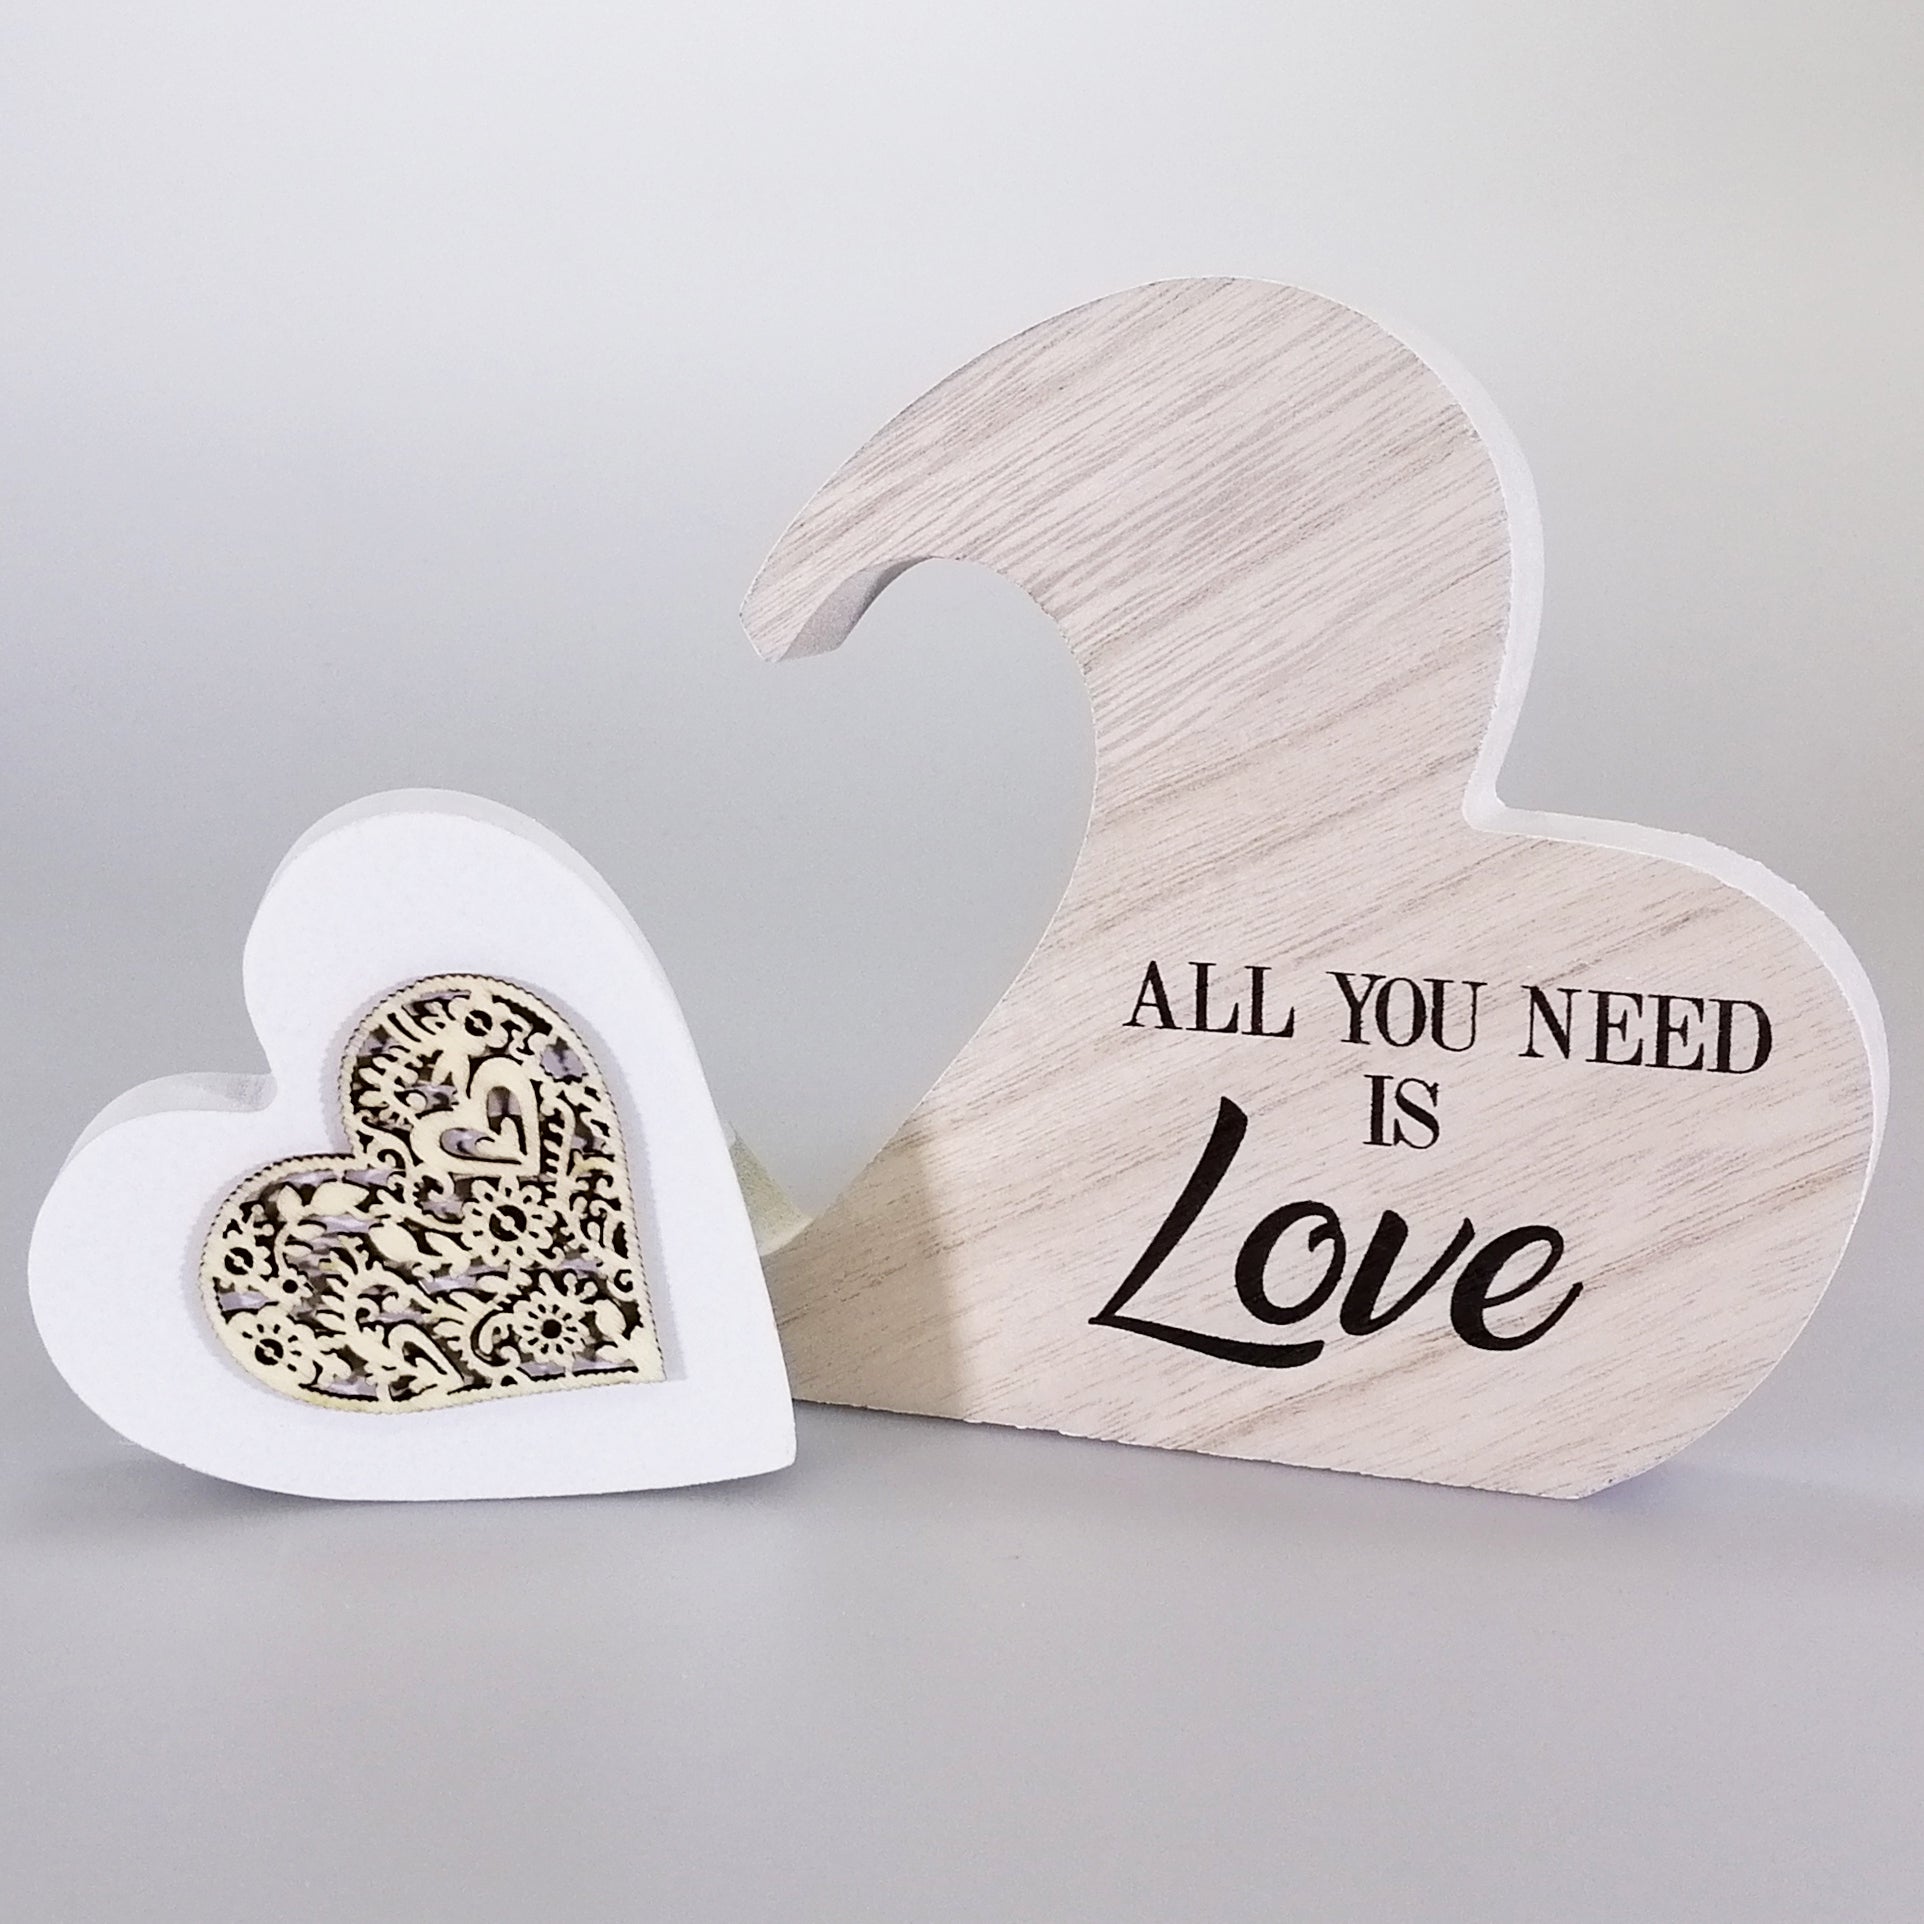 All You Need Is Love' Heart Plaque - Small - 2 Piece